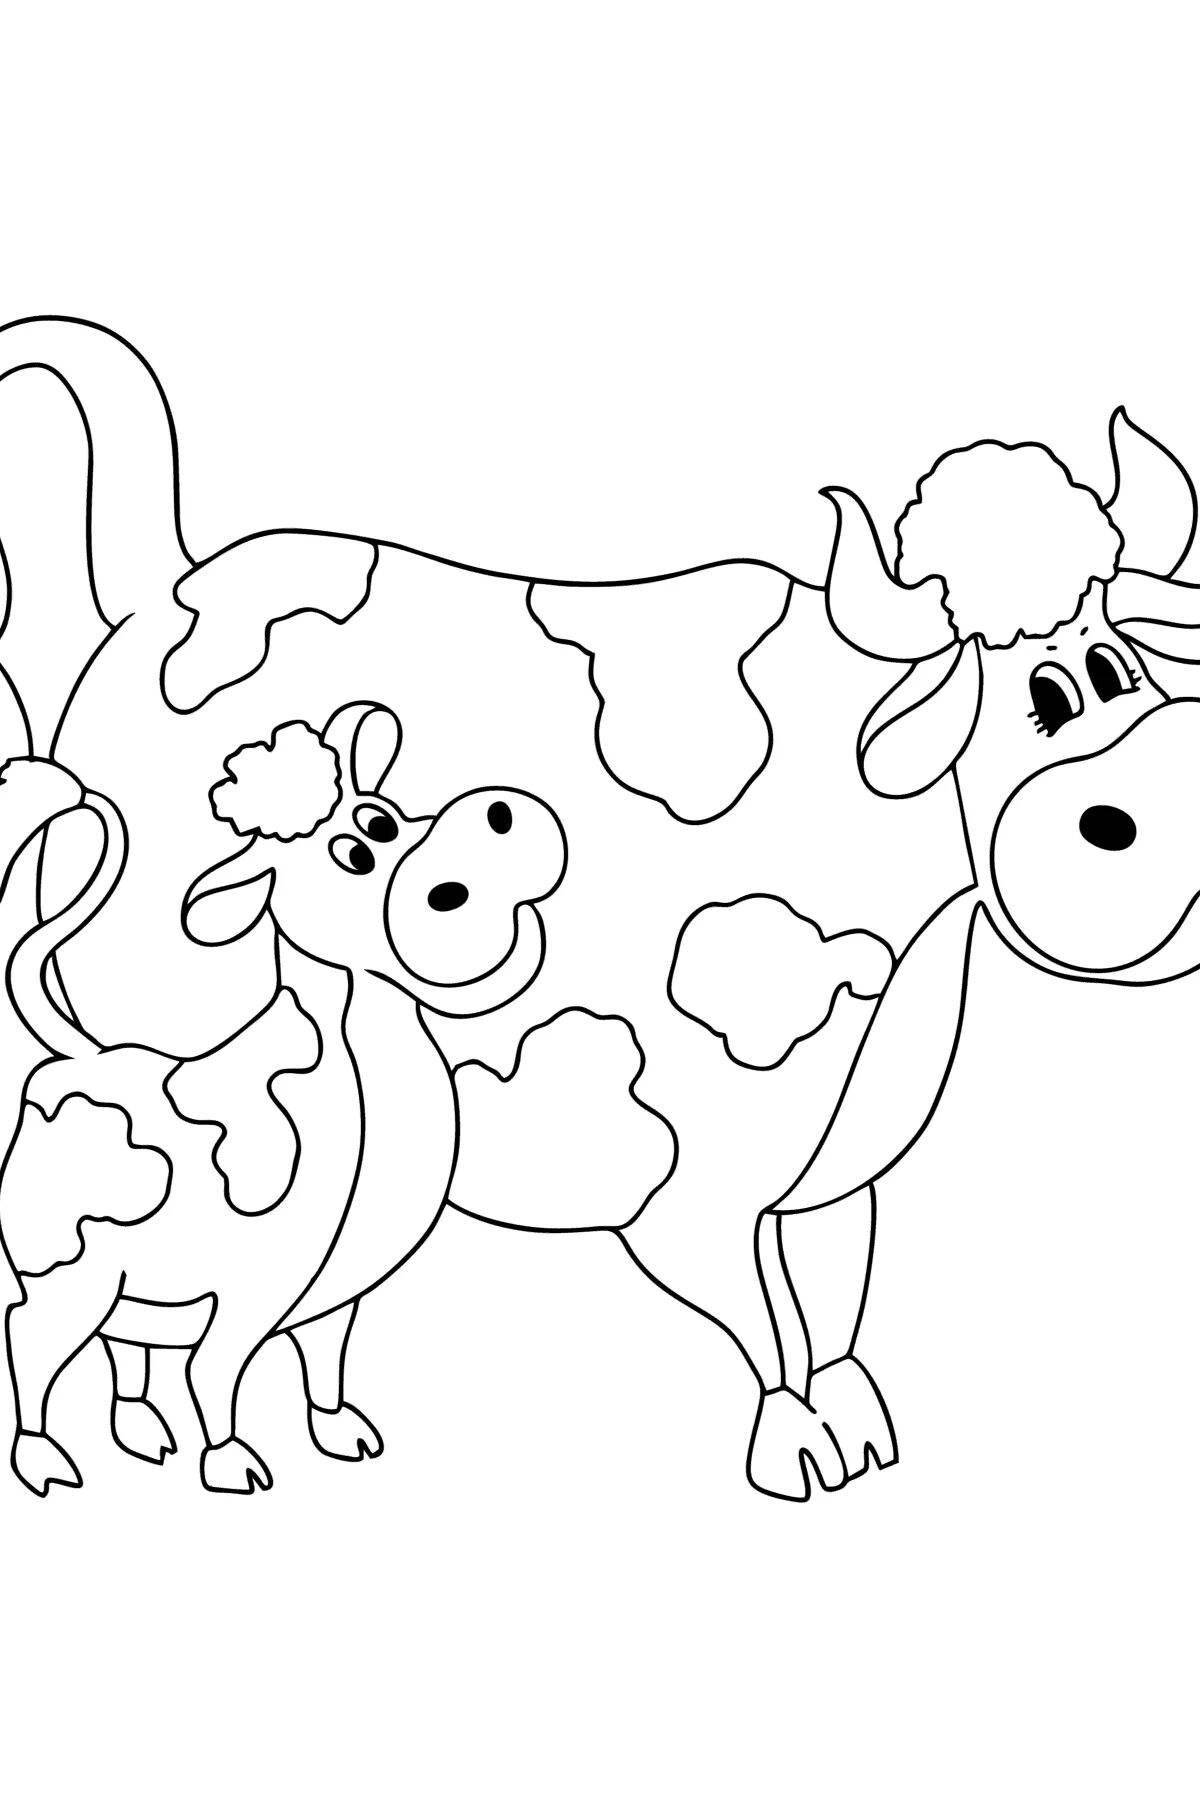 Cute cow and calf coloring book